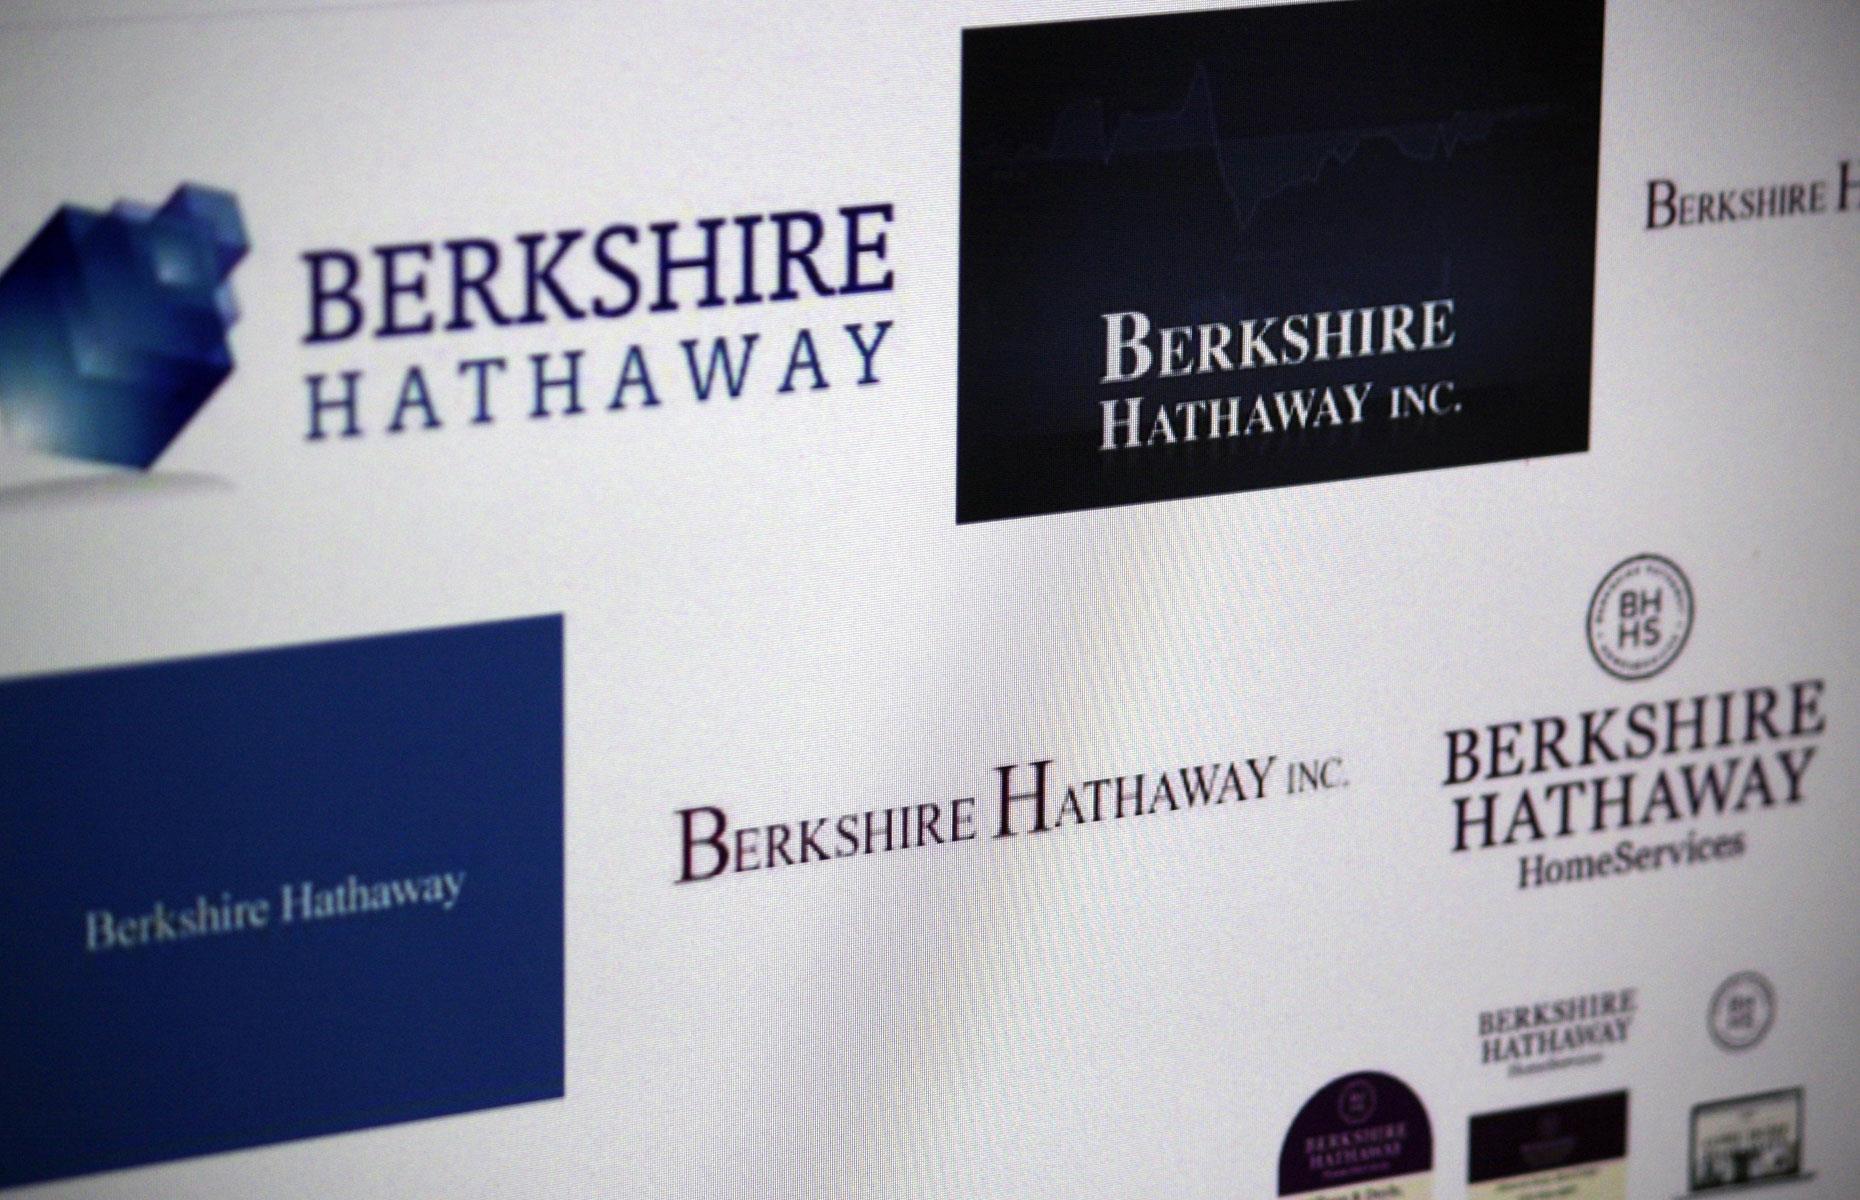 Berkshire Hathaway is no traditional conglomerate